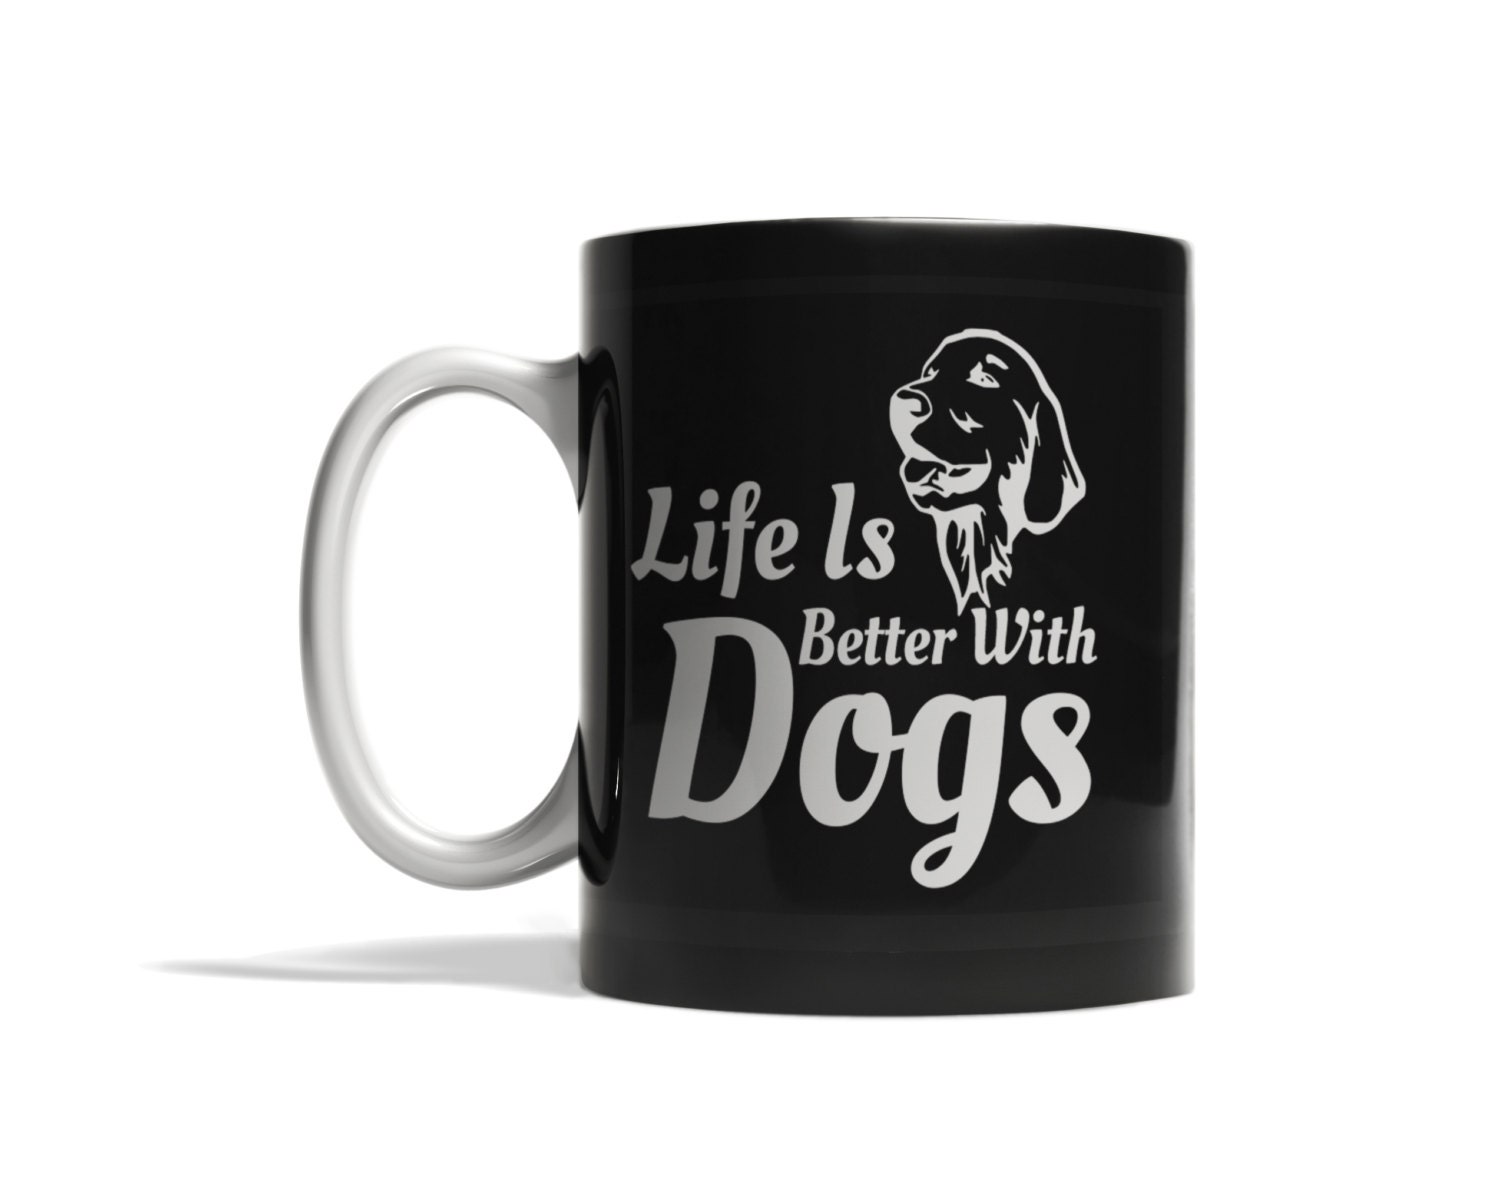 Life is better with dogs coffee mug